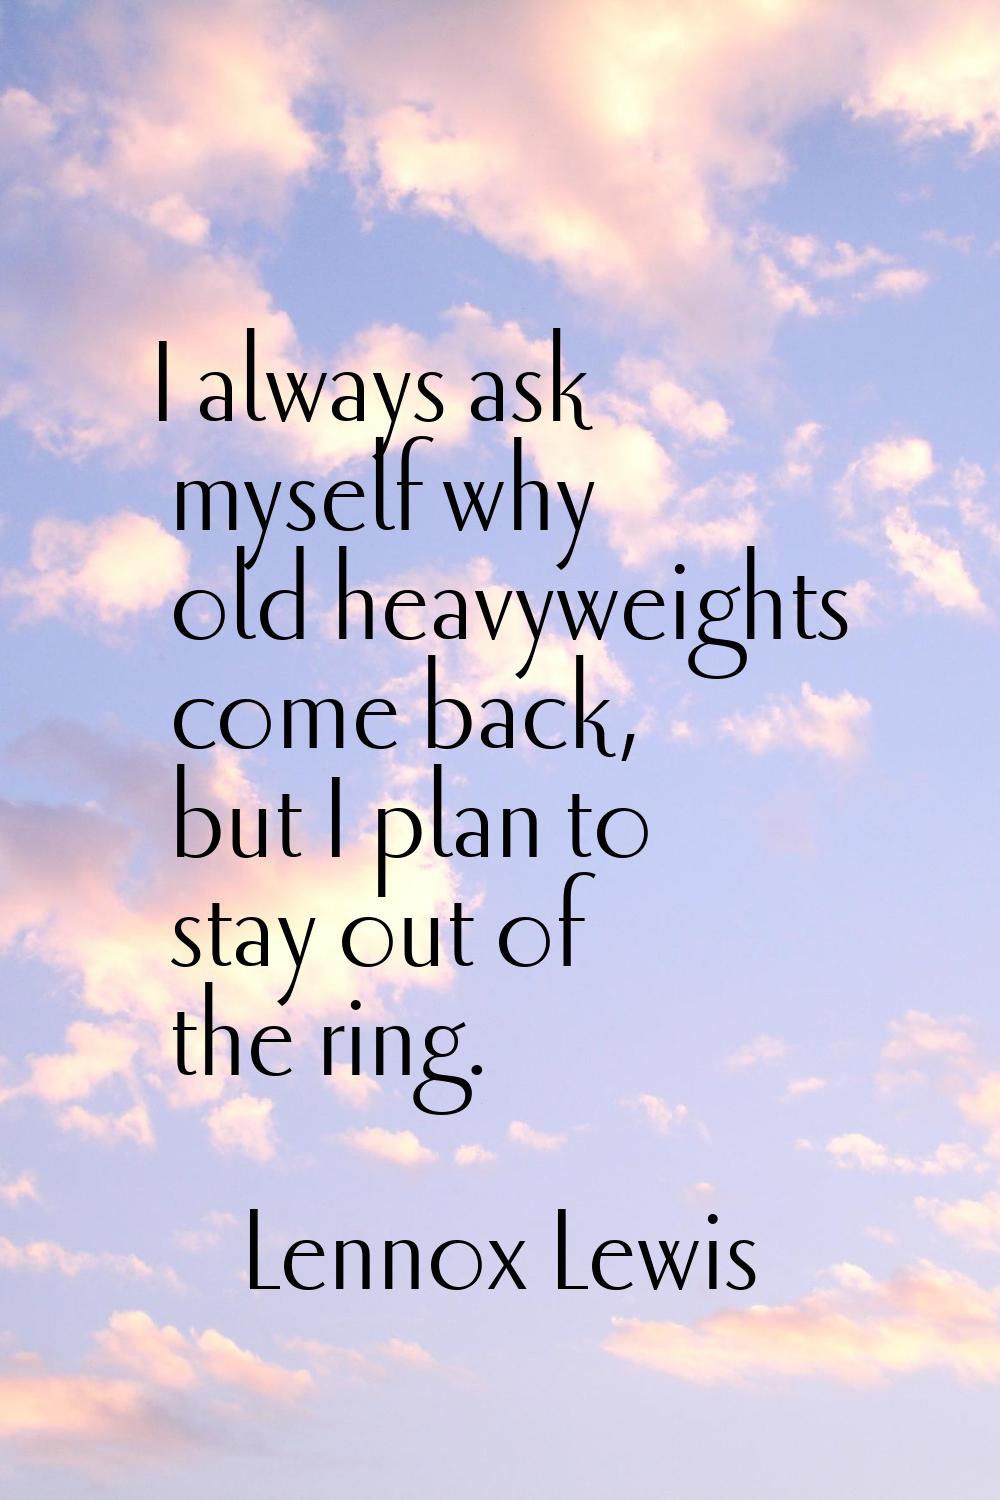 I always ask myself why old heavyweights come back, but I plan to stay out of the ring.